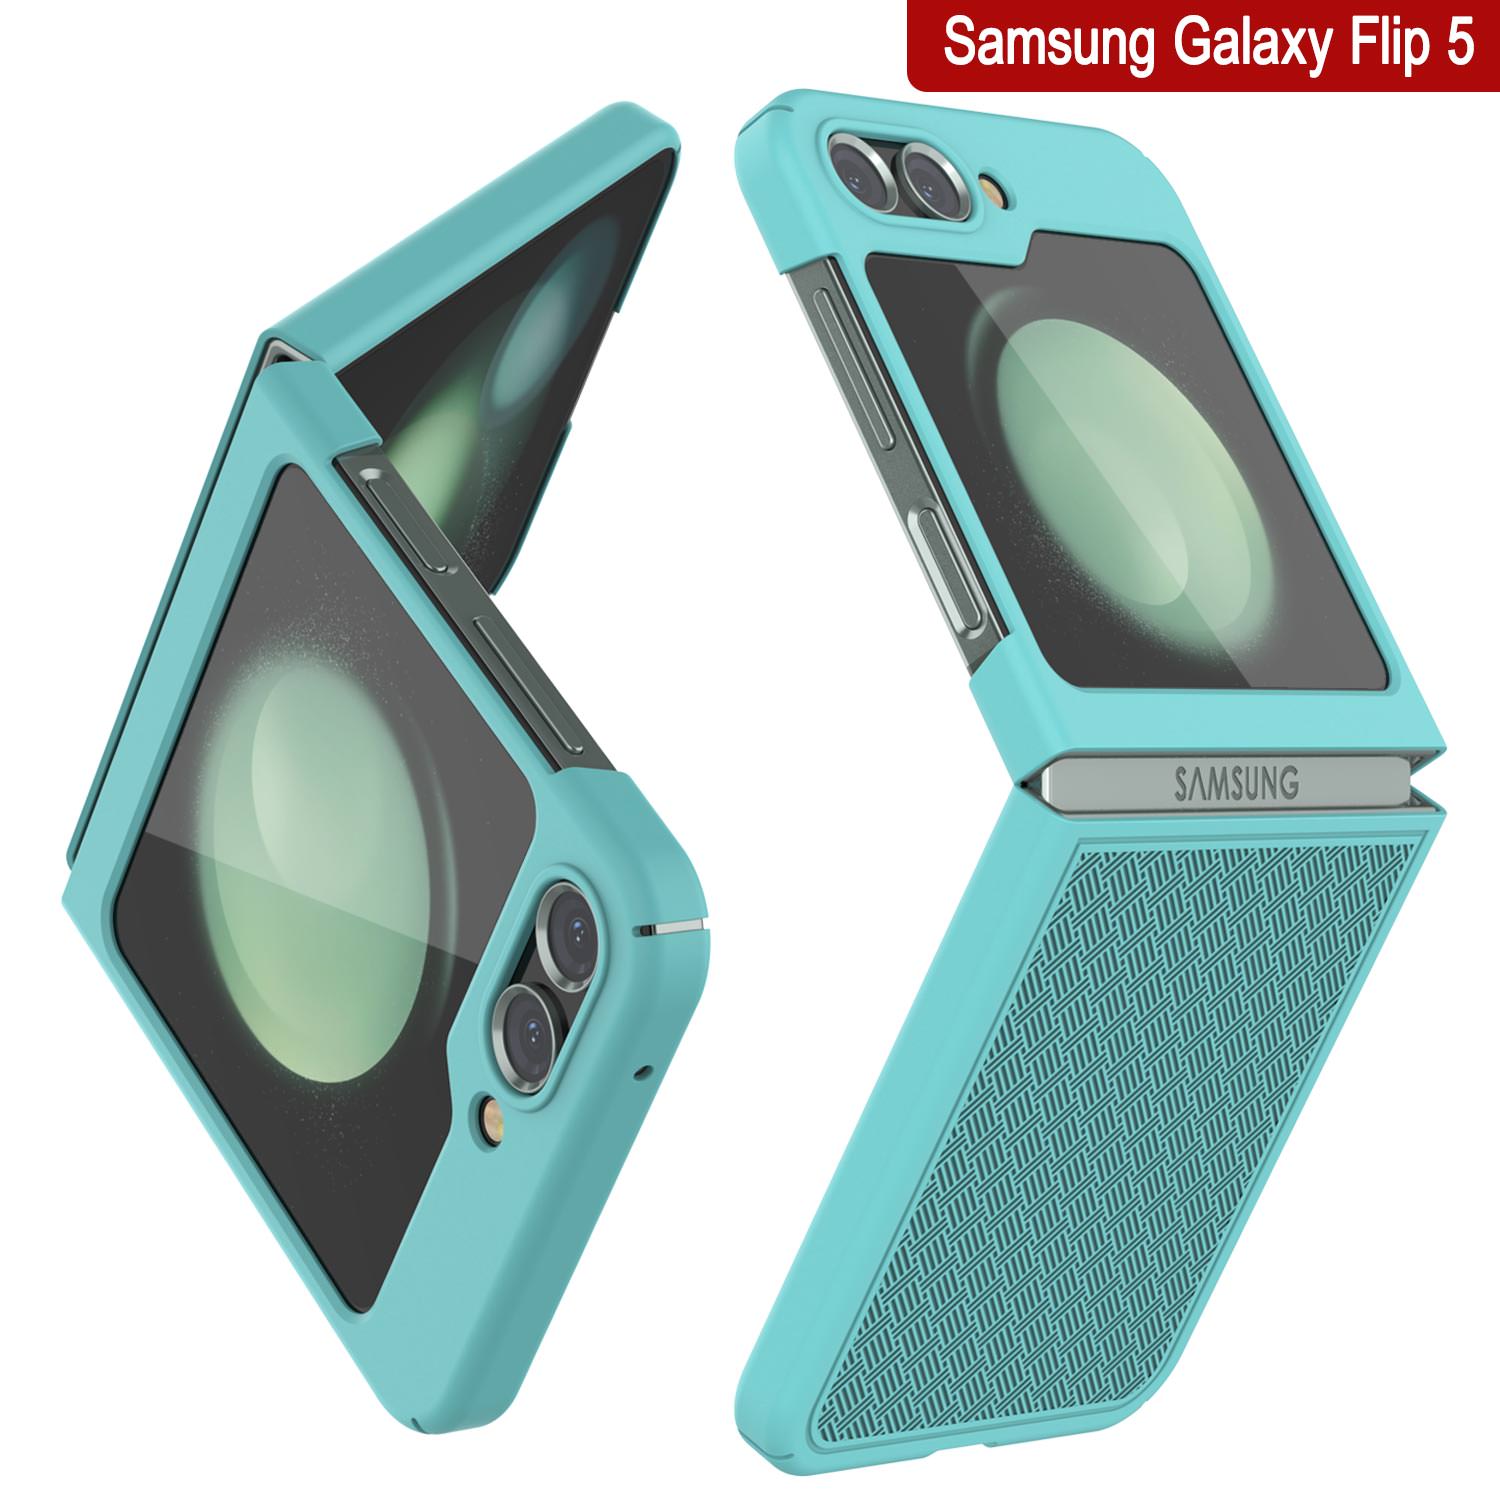 Galaxy Z Flip5 Case With Tempered Glass Screen Protector, Holster Belt Clip & Built-In Kickstand [Teal]